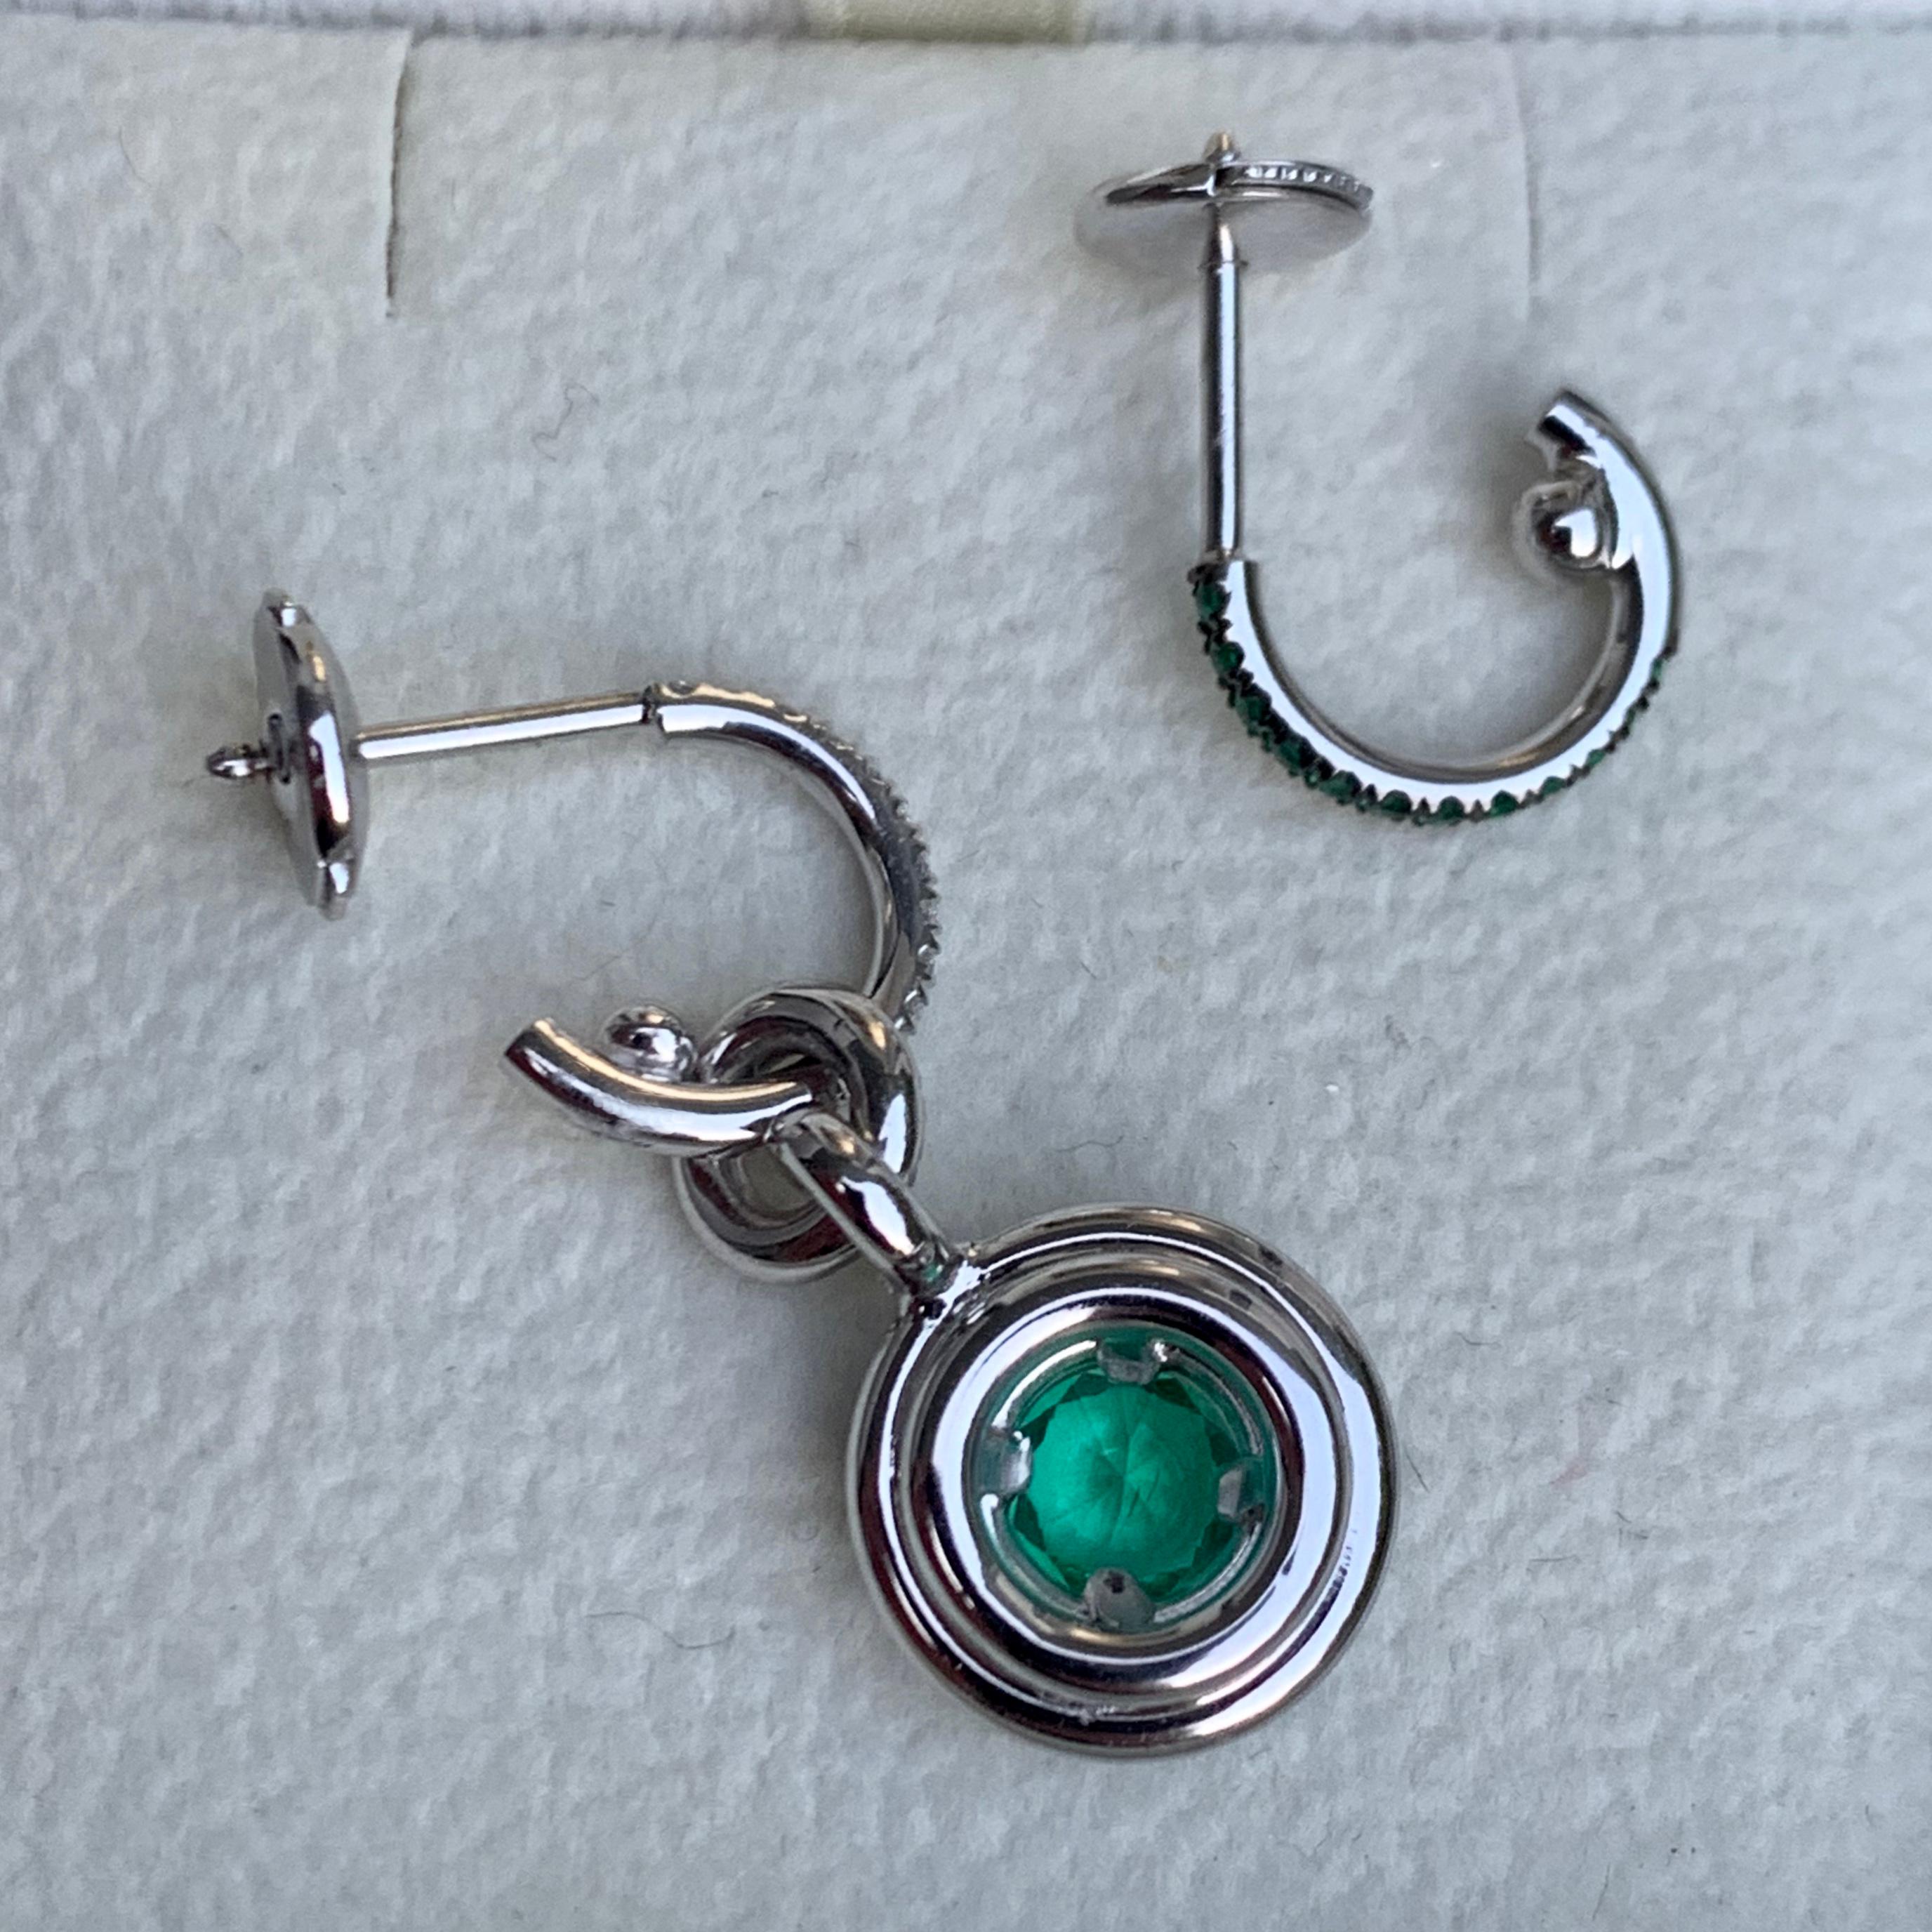 Women's Mismatched Colombian Emerald and Diamond Earrings & Enhancer Bail